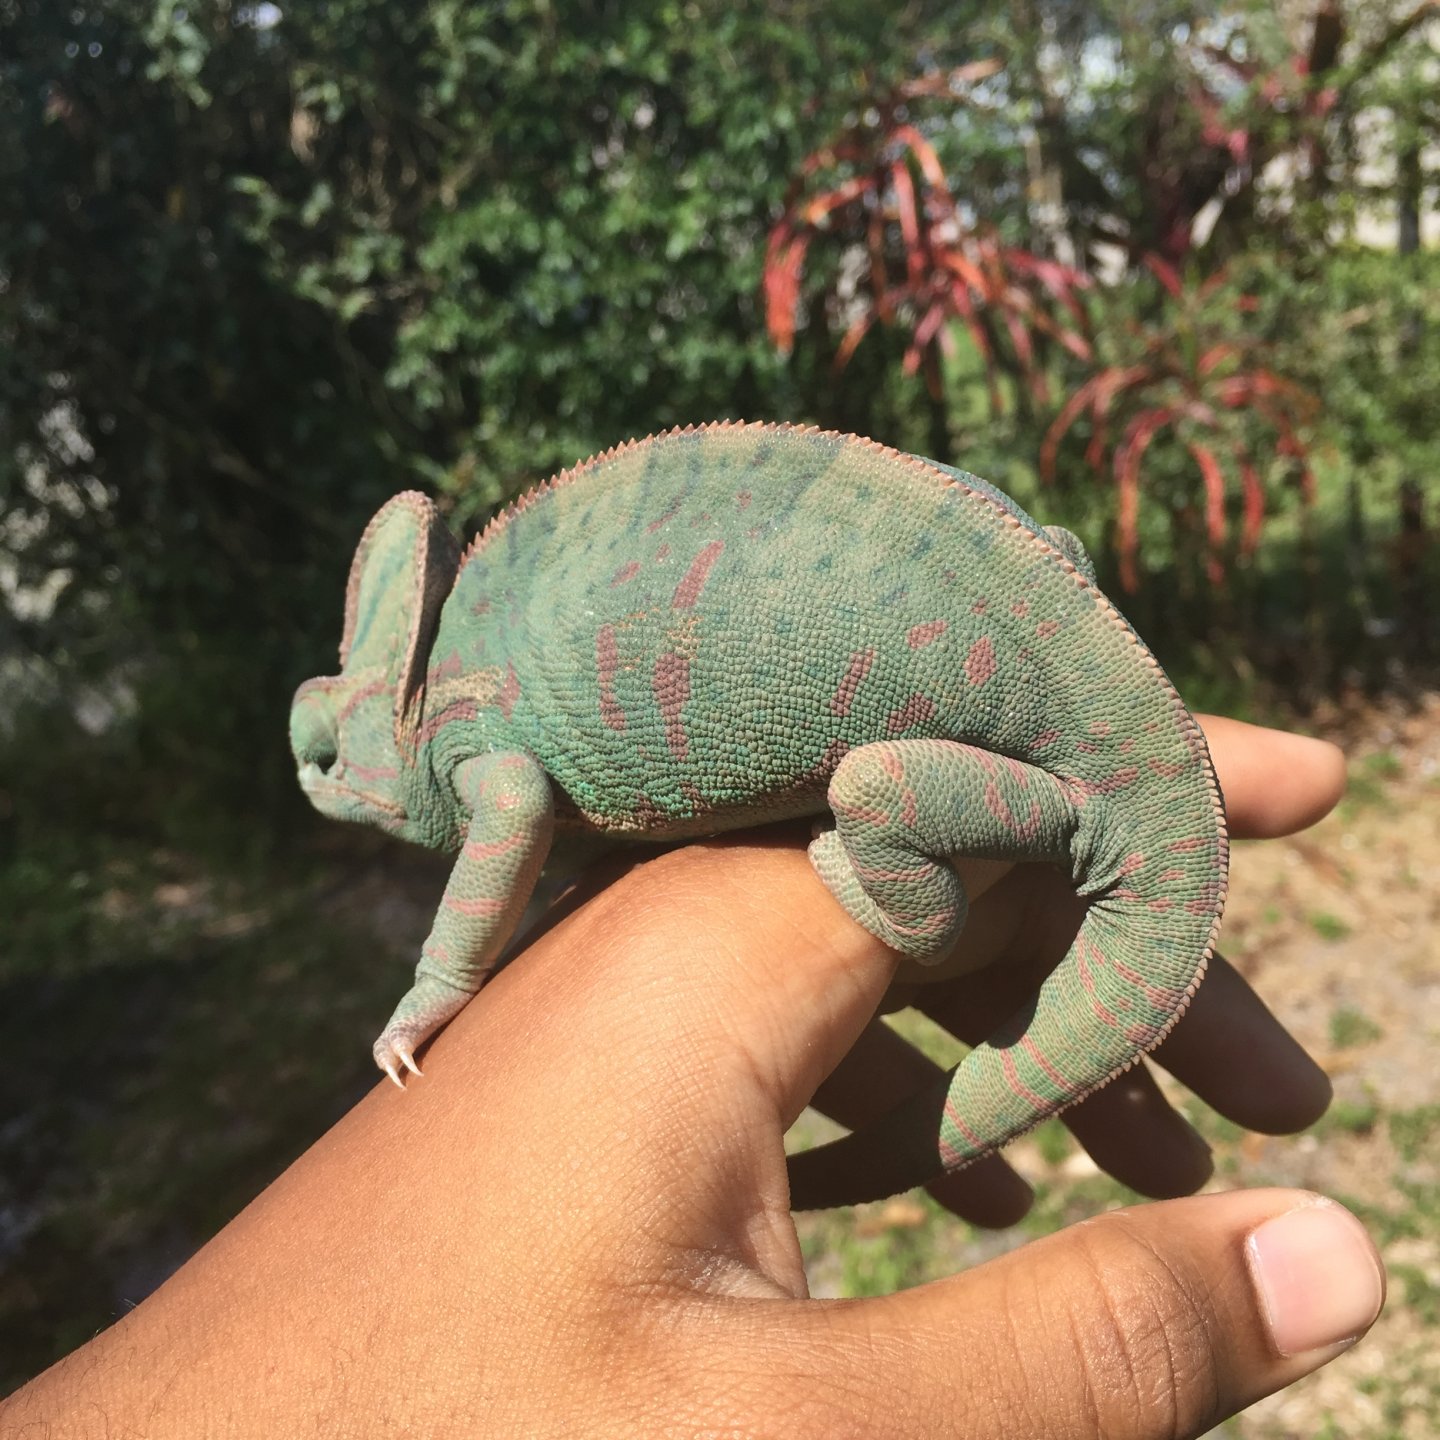 How Can You Tell if a Chameleon is Pregnant?